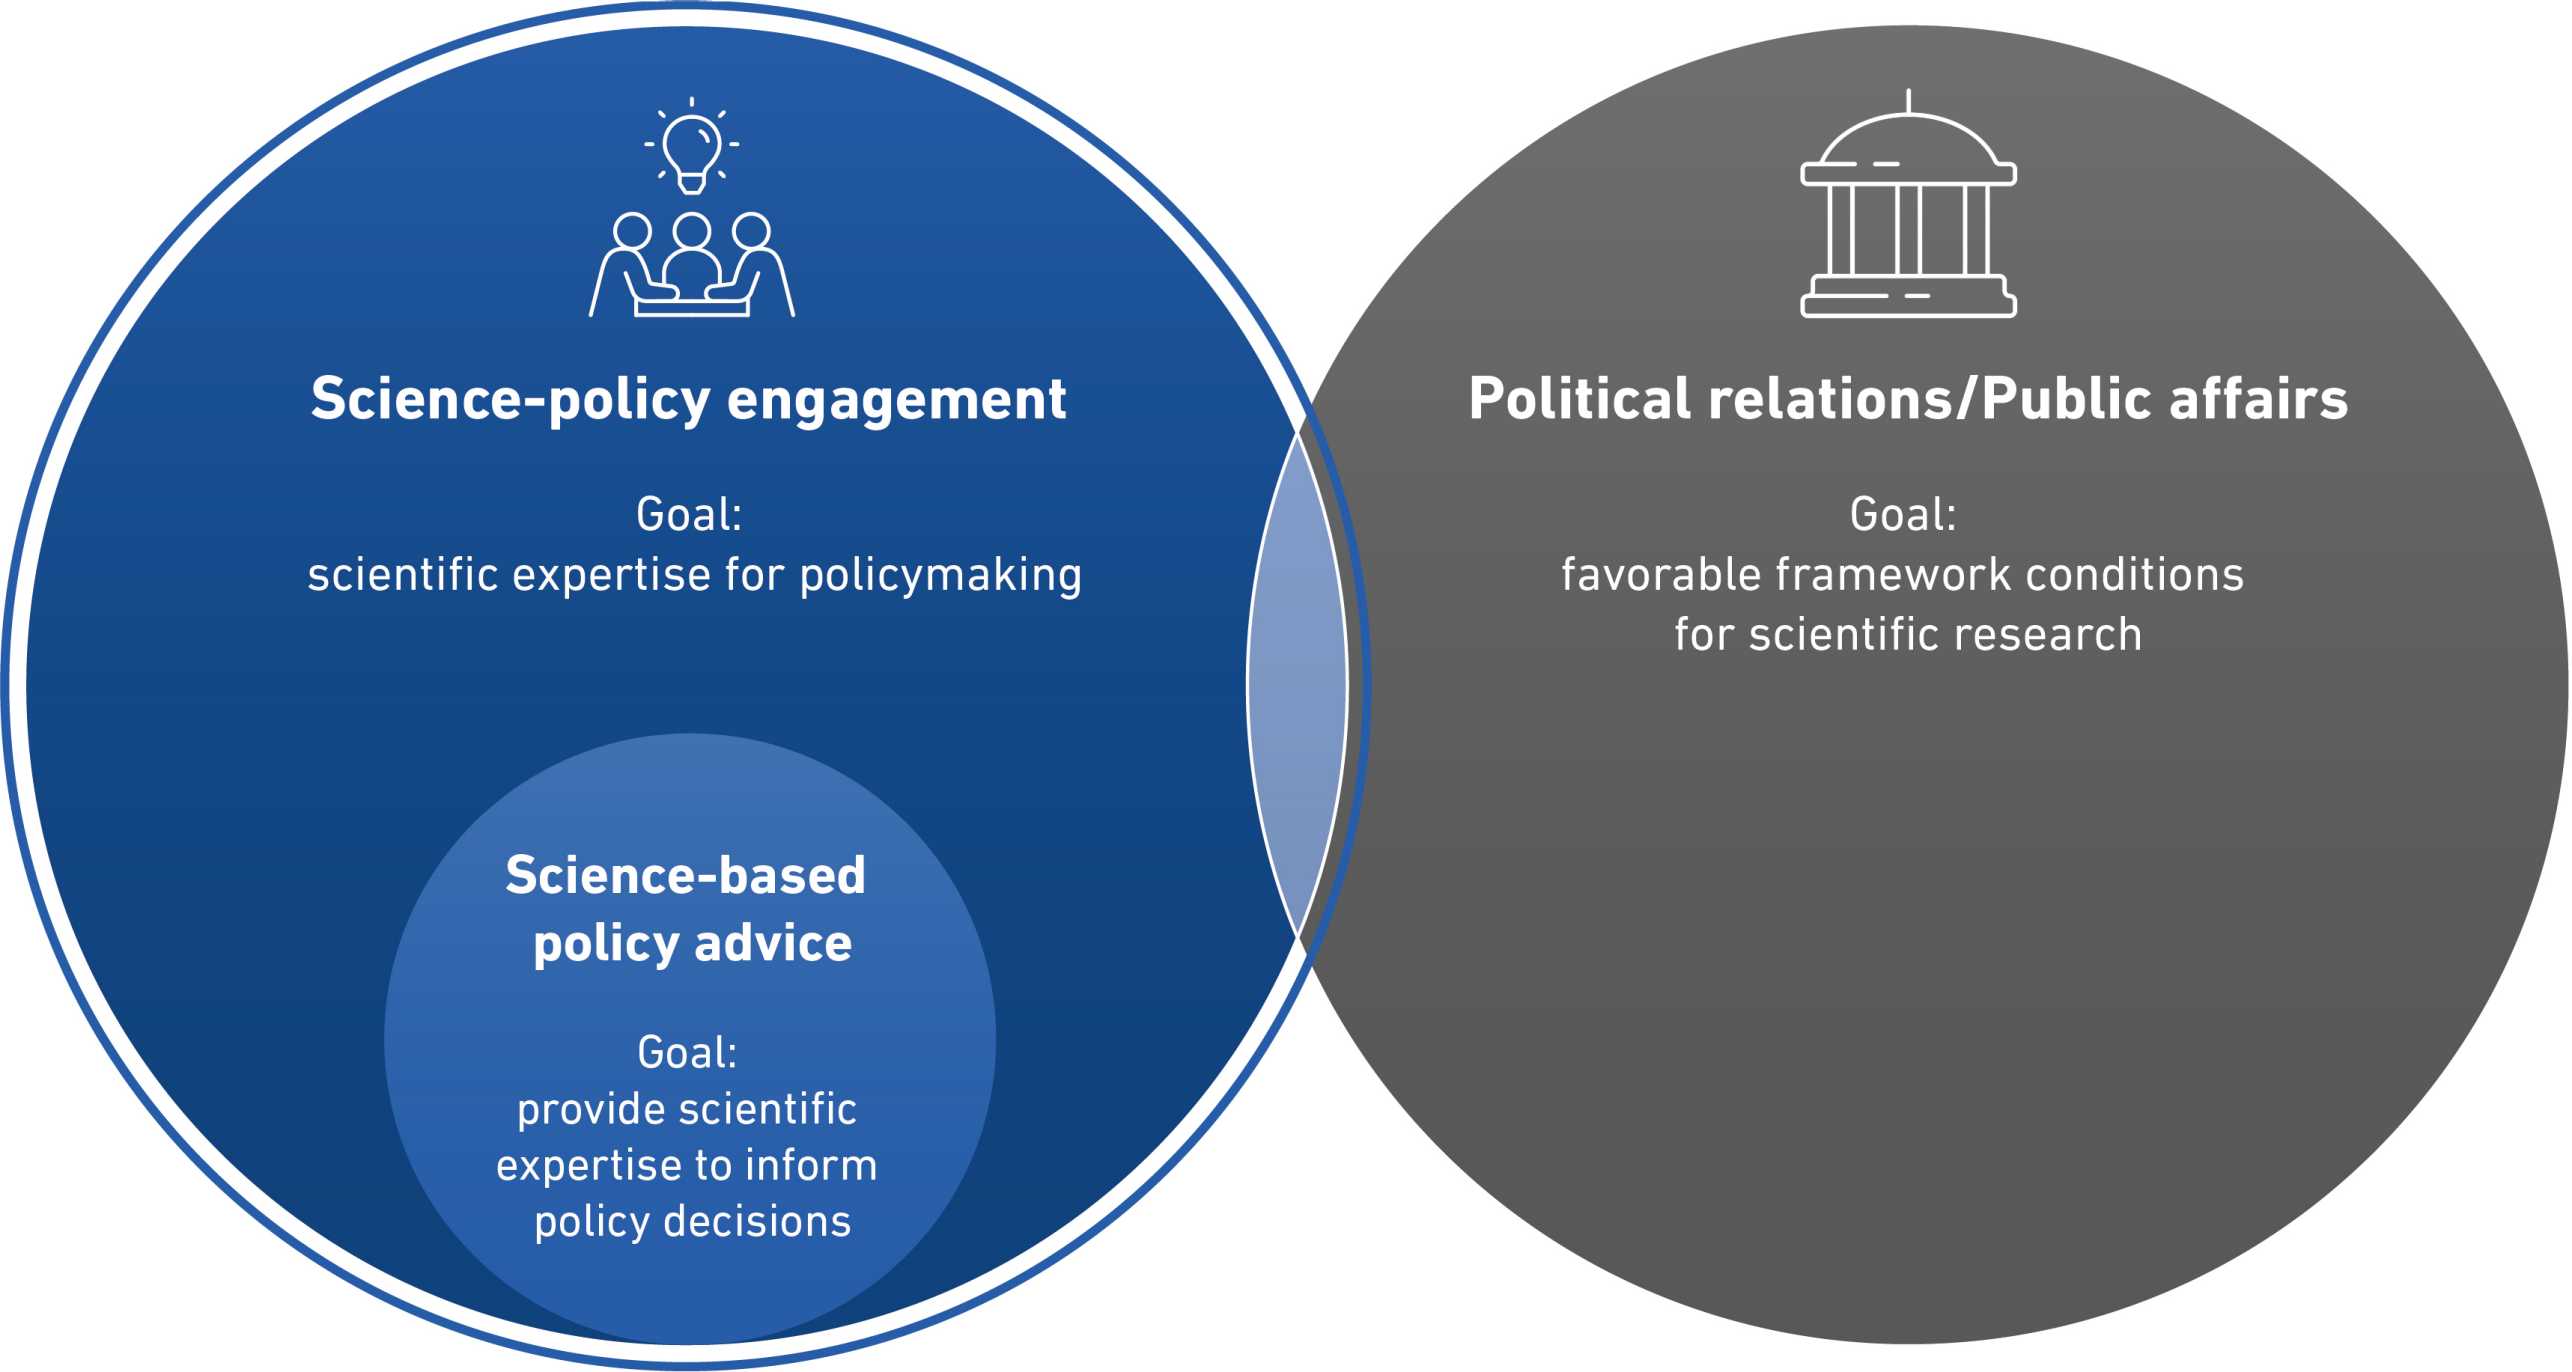 Difference between science-policy engagement and political relations/public affairs